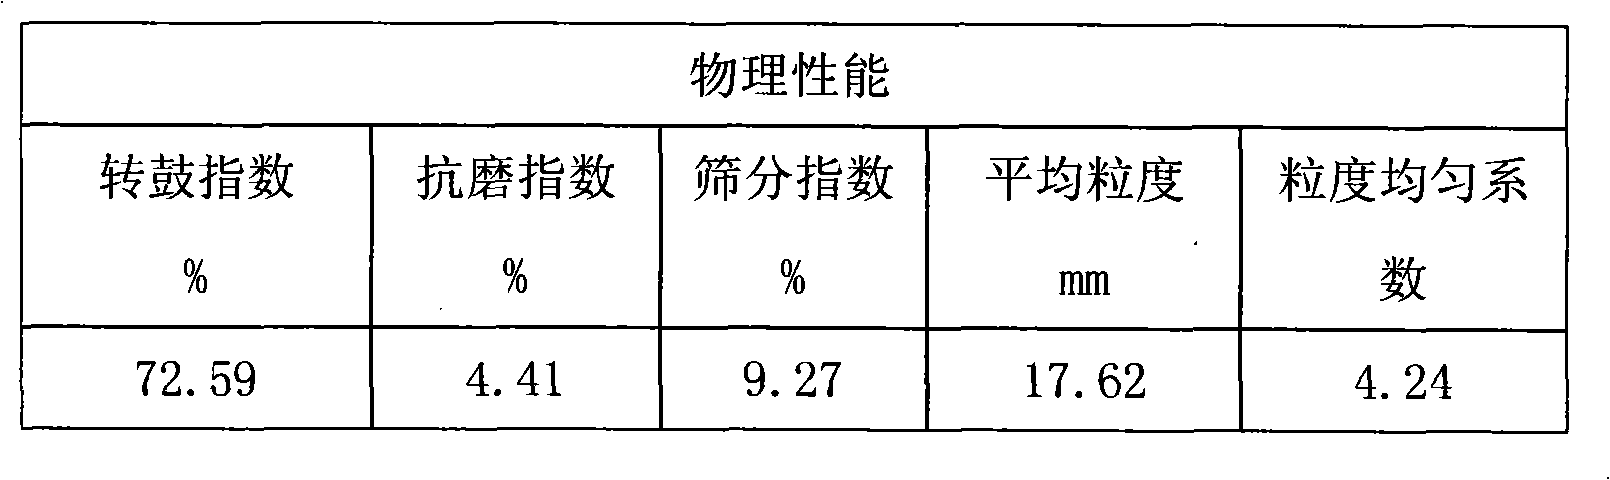 Method for manufacturing sintering ore from limonite with high content of crystal water